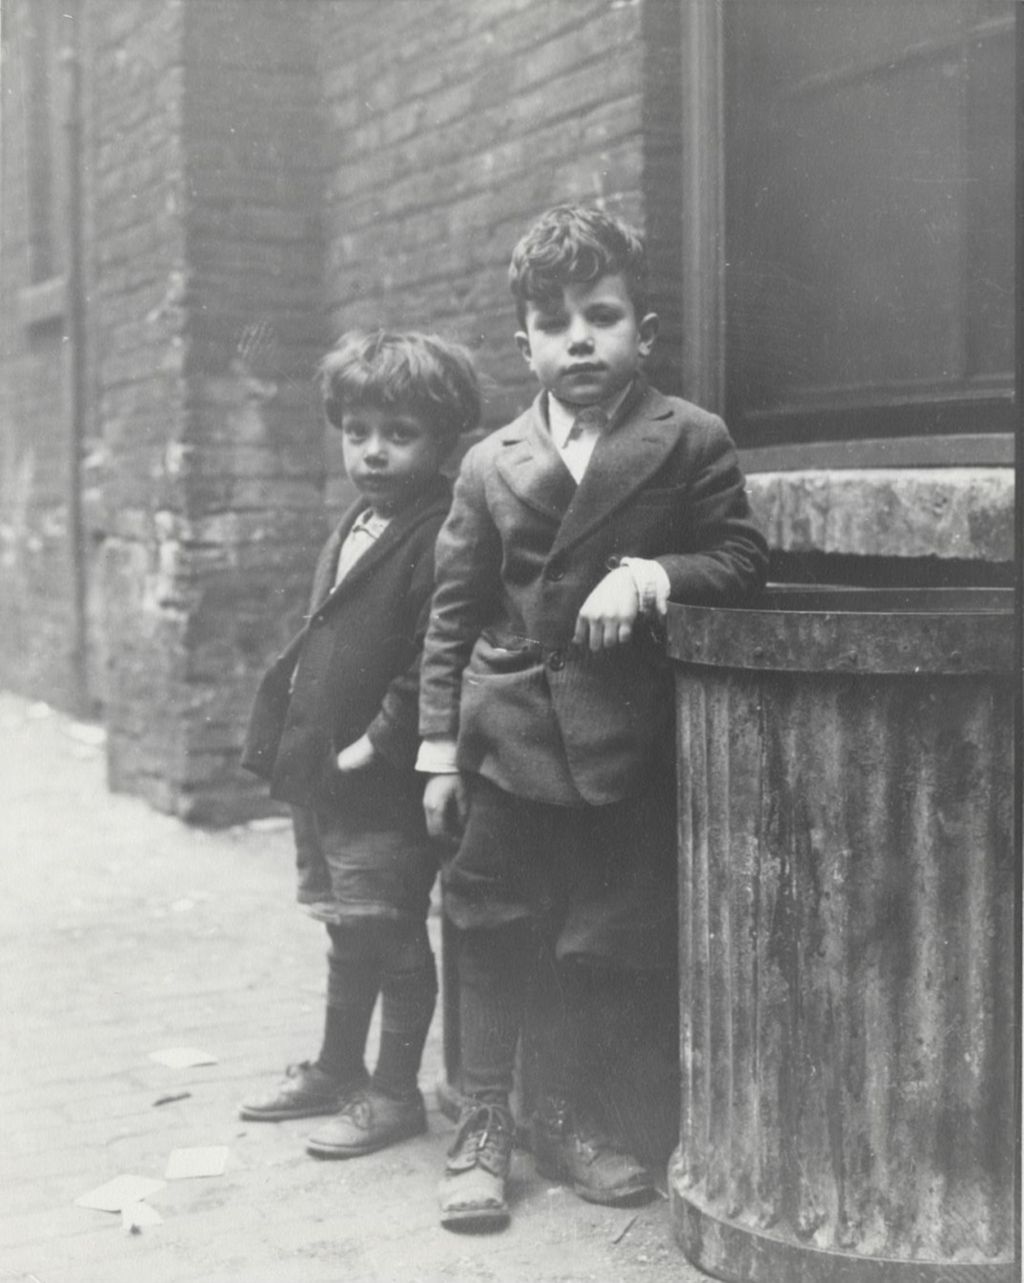 Two boys standing next to garbage can in alley